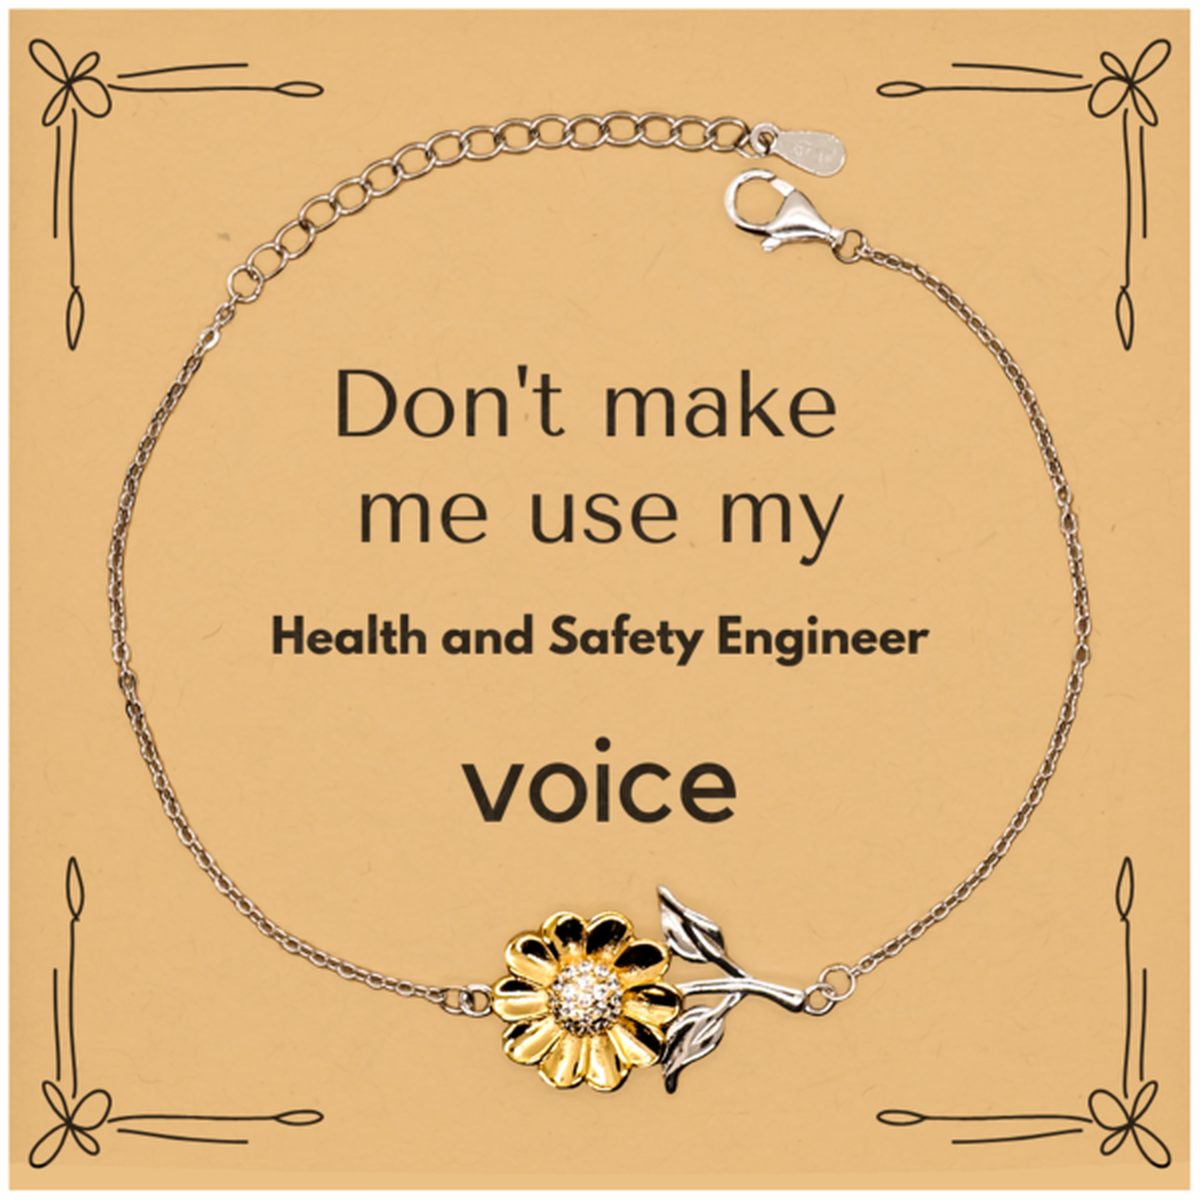 Don't make me use my Health and Safety Engineer voice, Sarcasm Health and Safety Engineer Card Gifts, Christmas Health and Safety Engineer Sunflower Bracelet Birthday Unique Gifts For Health and Safety Engineer Coworkers, Men, Women, Colleague, Friends